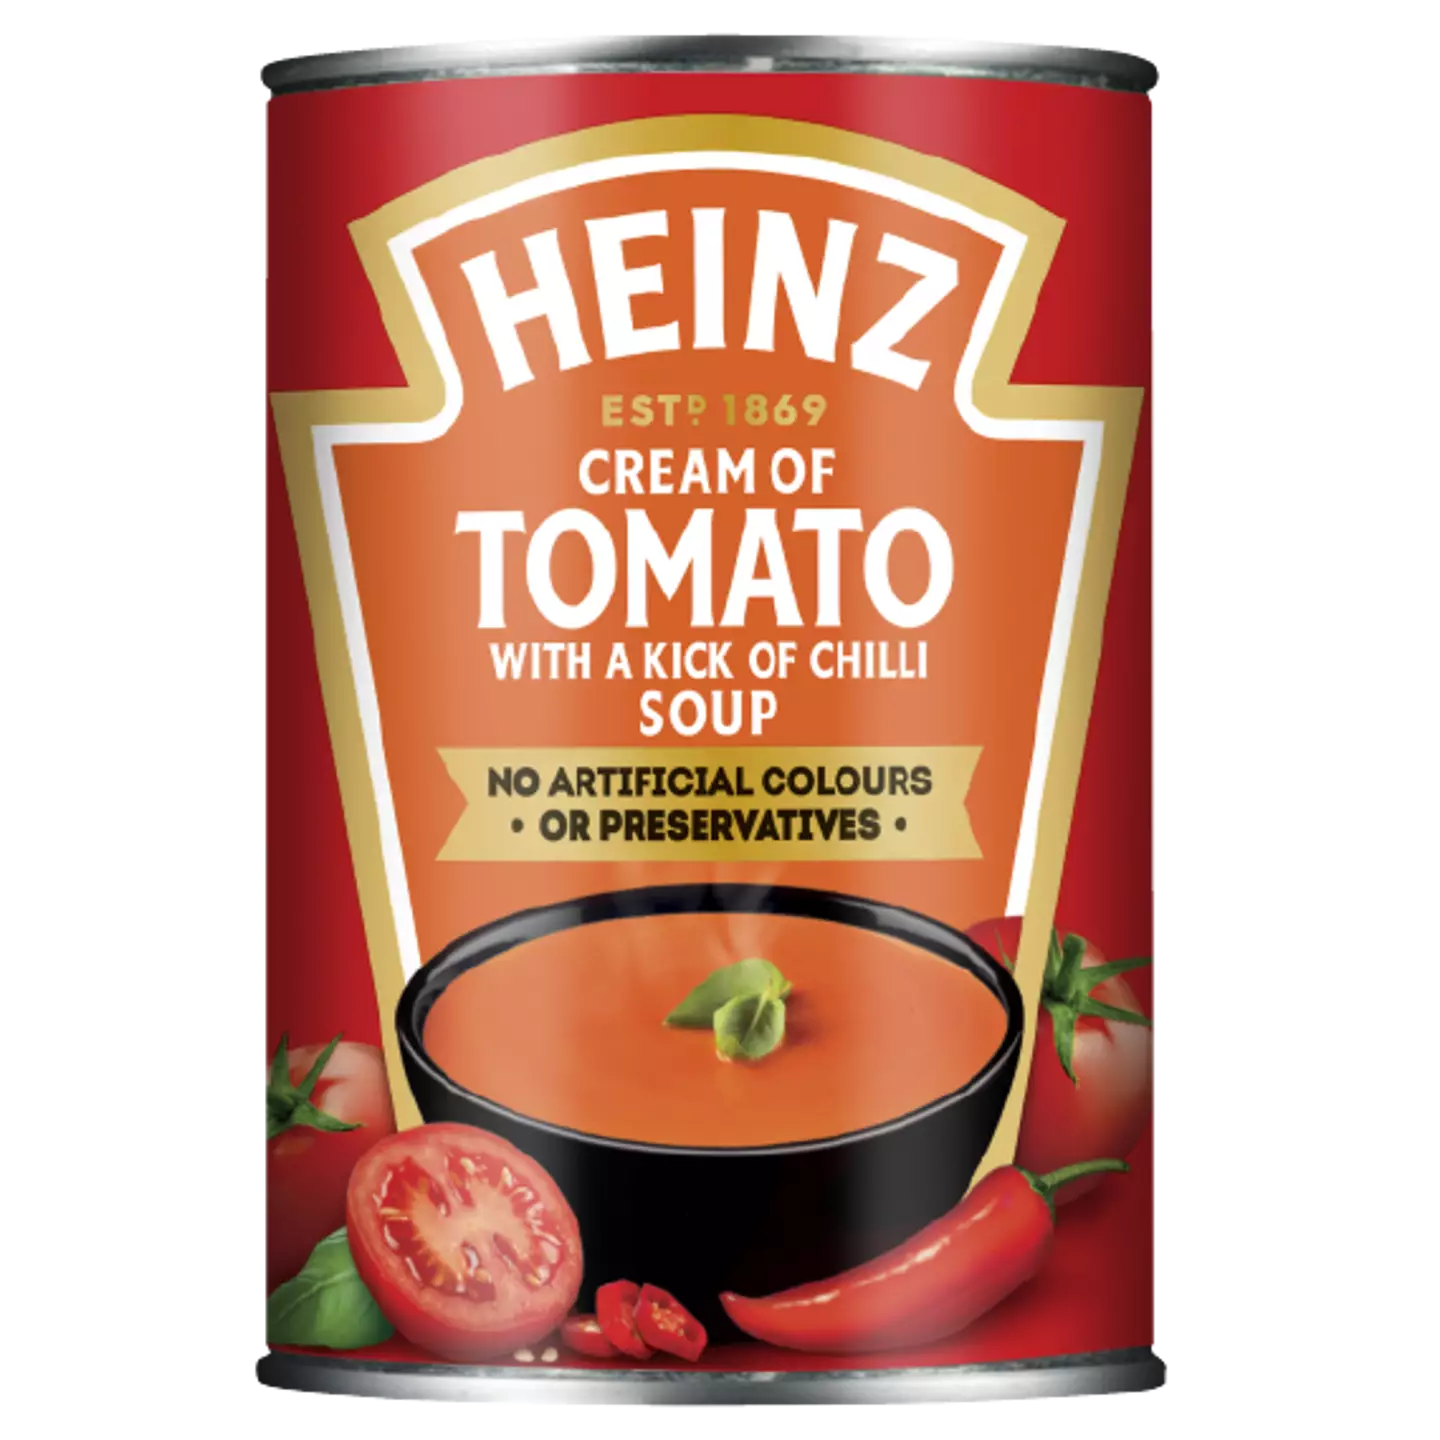 Cream of Tomato Soup With a Kick of Chilli has been discontinued.